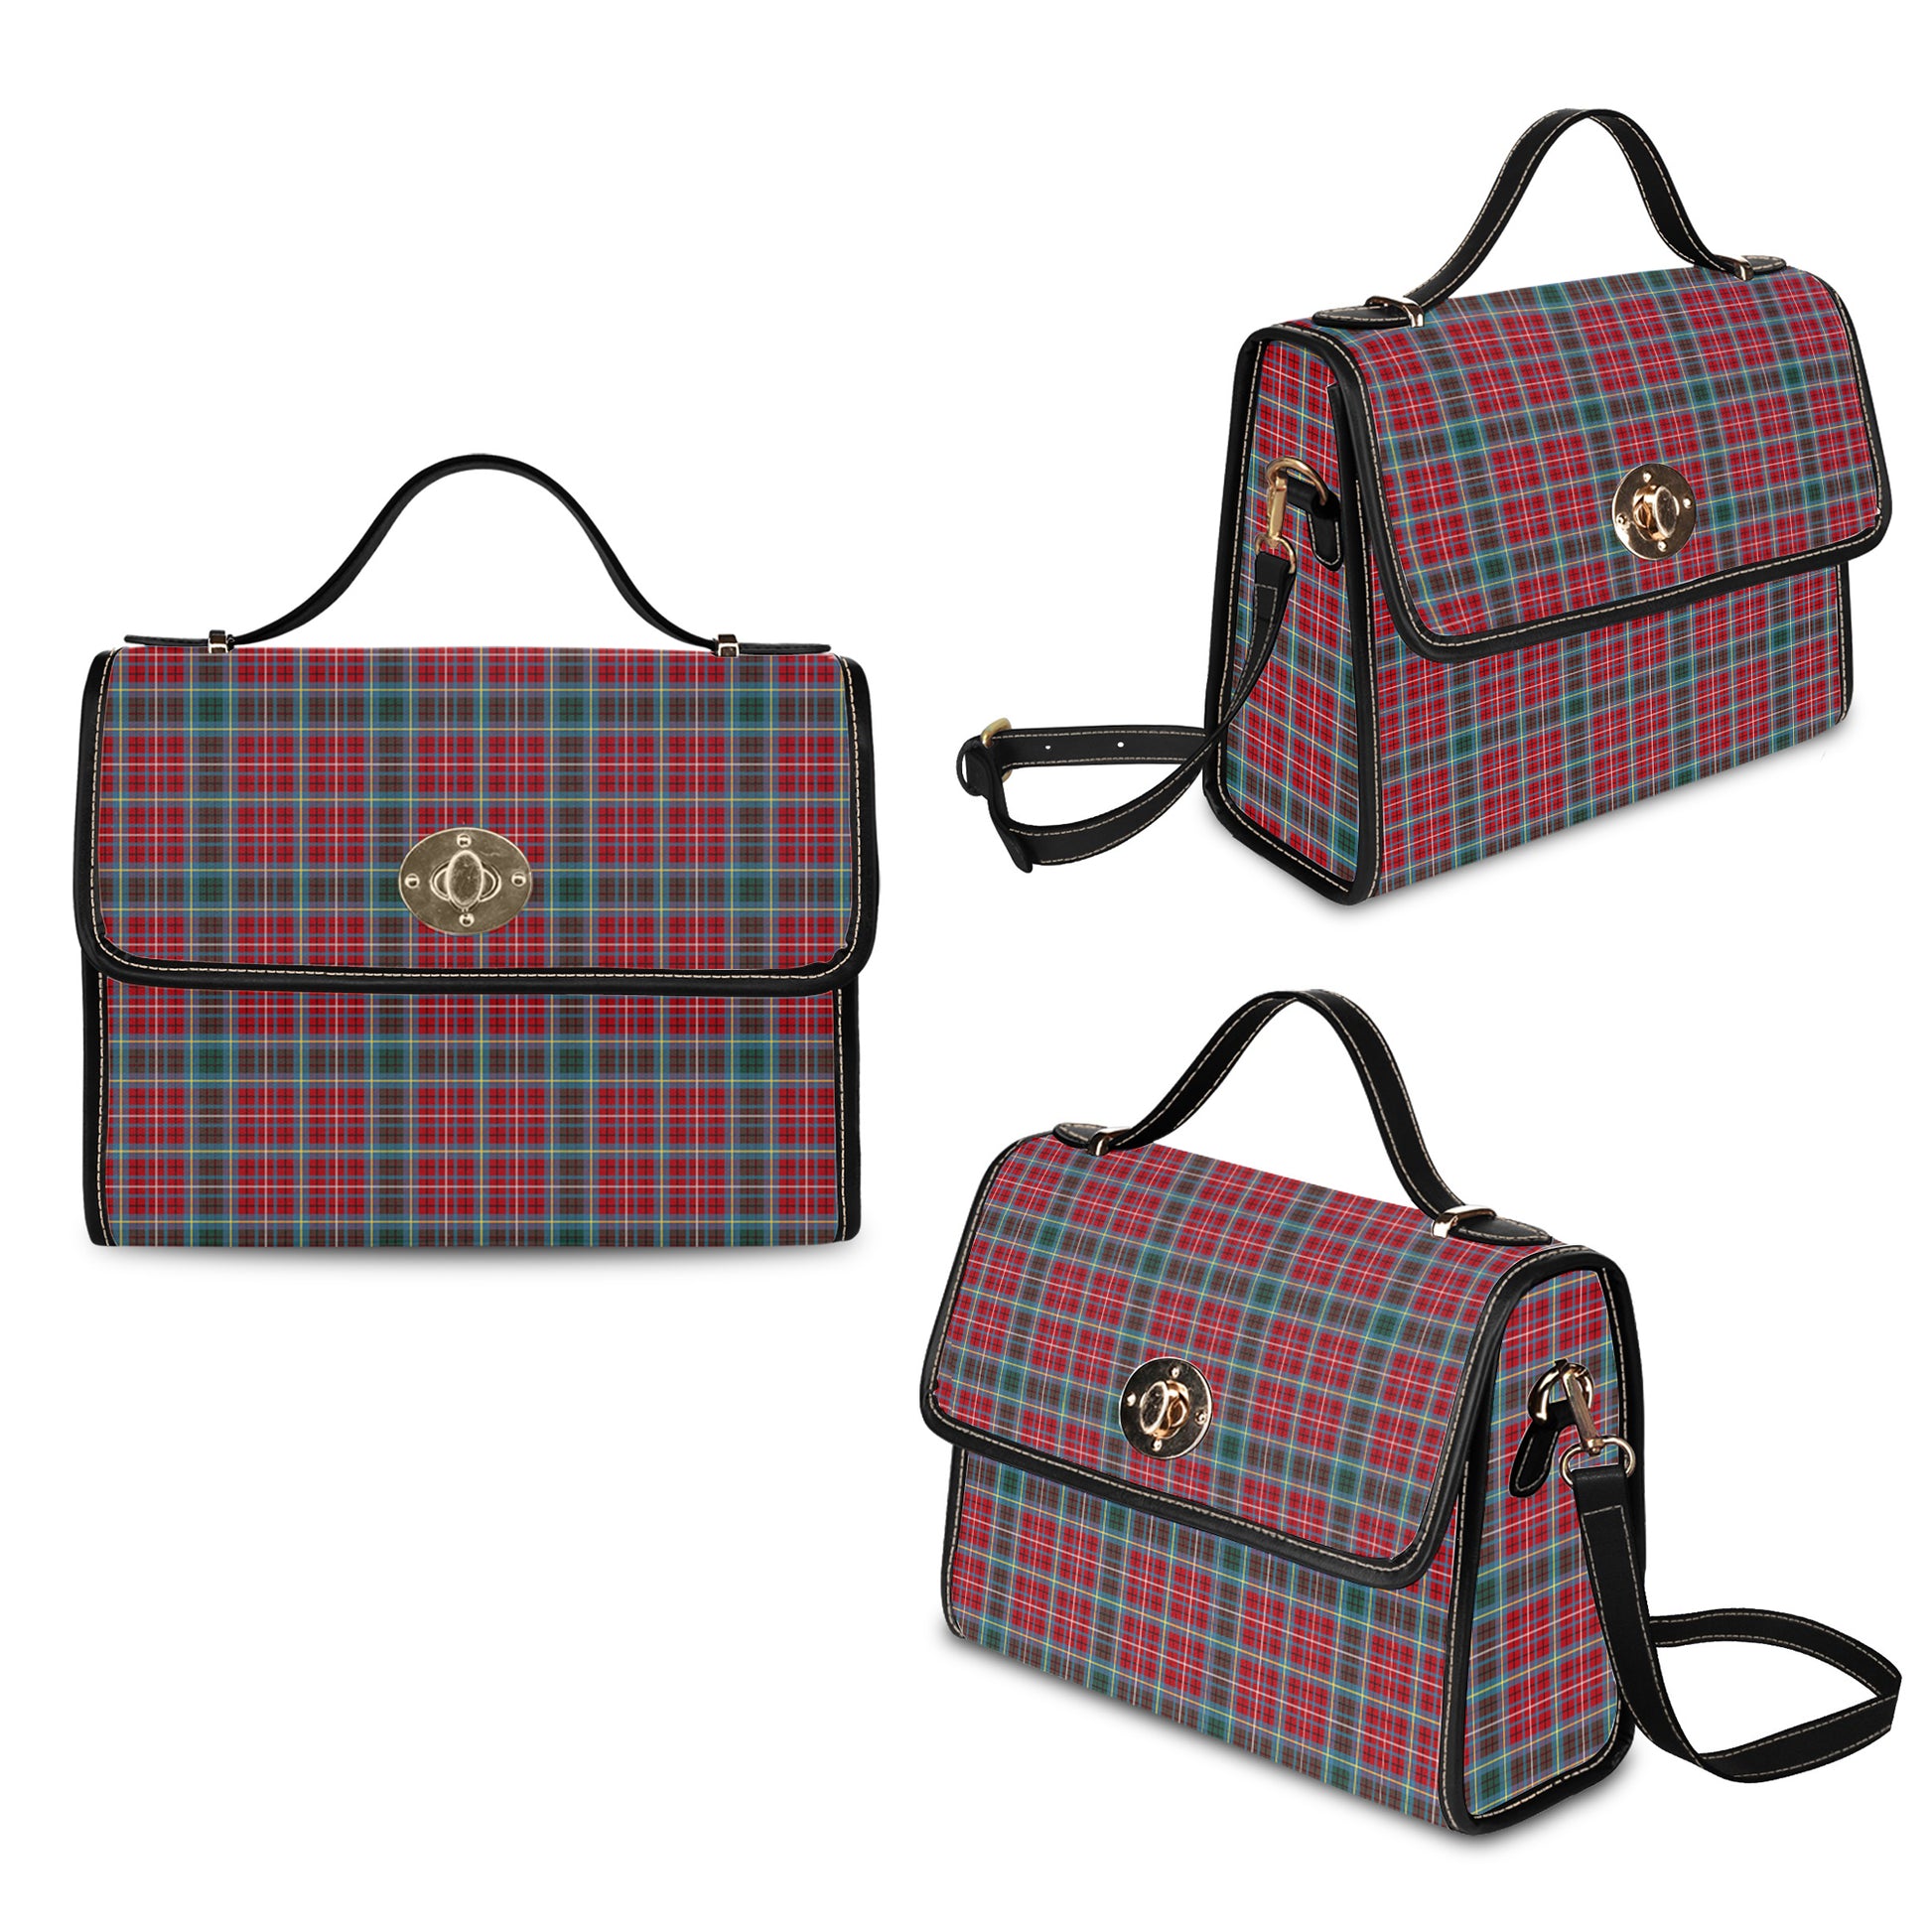 British Columbia Province Canada Tartan Leather Strap Waterproof Canvas Bag Brown Leather Strap One Size 34cm * 42cm (13.4" x 16.5") - Tartanvibesclothing